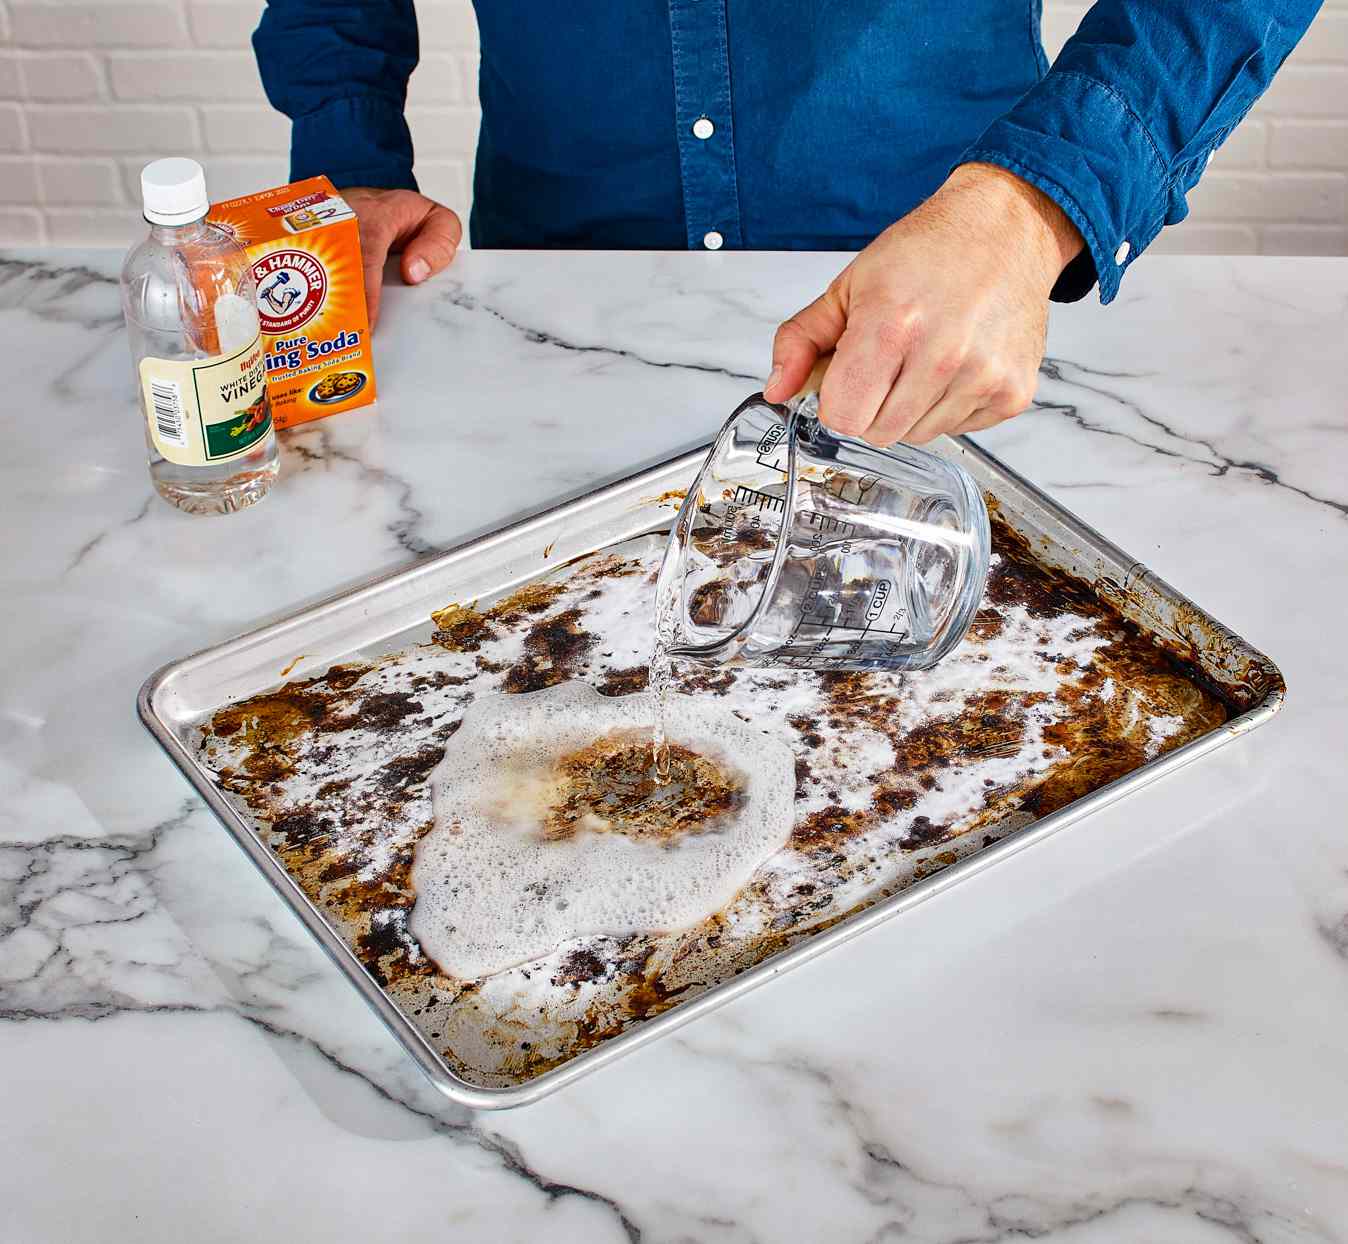 5 Easy Ways To Clean Baking Sheets So They Look Brand New Better Homes Gardens